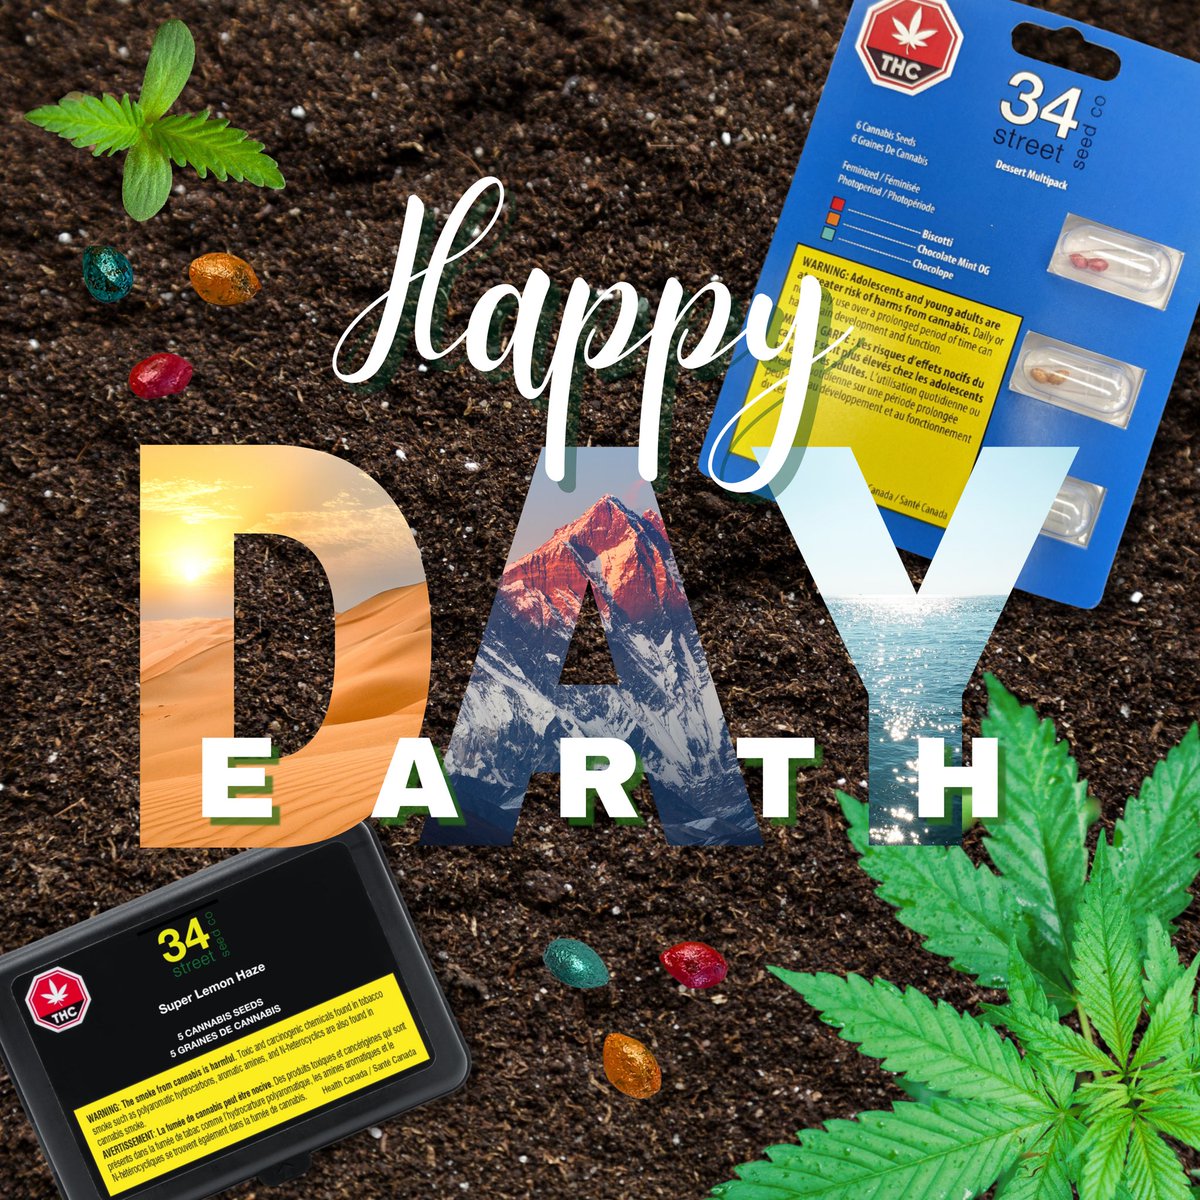 Happy Earth Day growers!  Let’s take this day to reflect on what we can do to help keep this big beautiful blue ball going so we can all keep on growing!